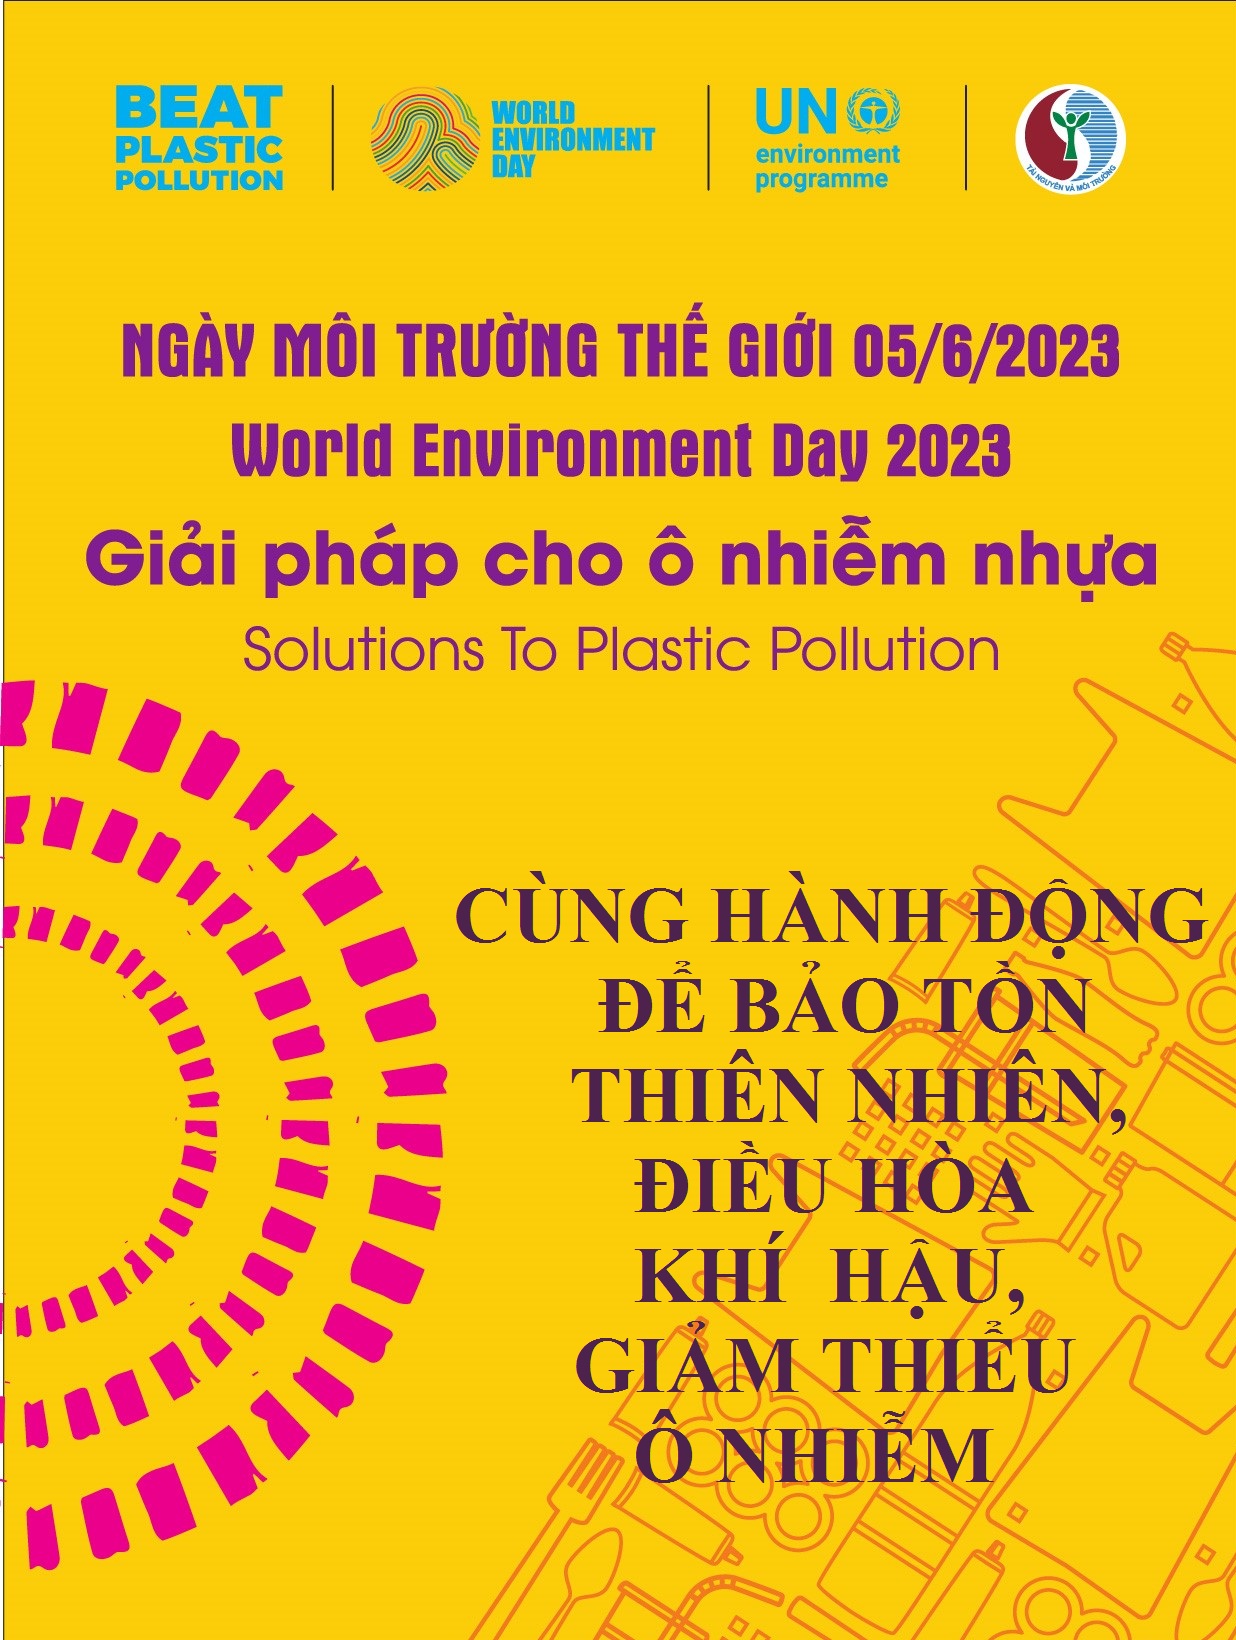 Propaganda in response to World Environment Day (June 5), World Oceans Day (June 8) 2023